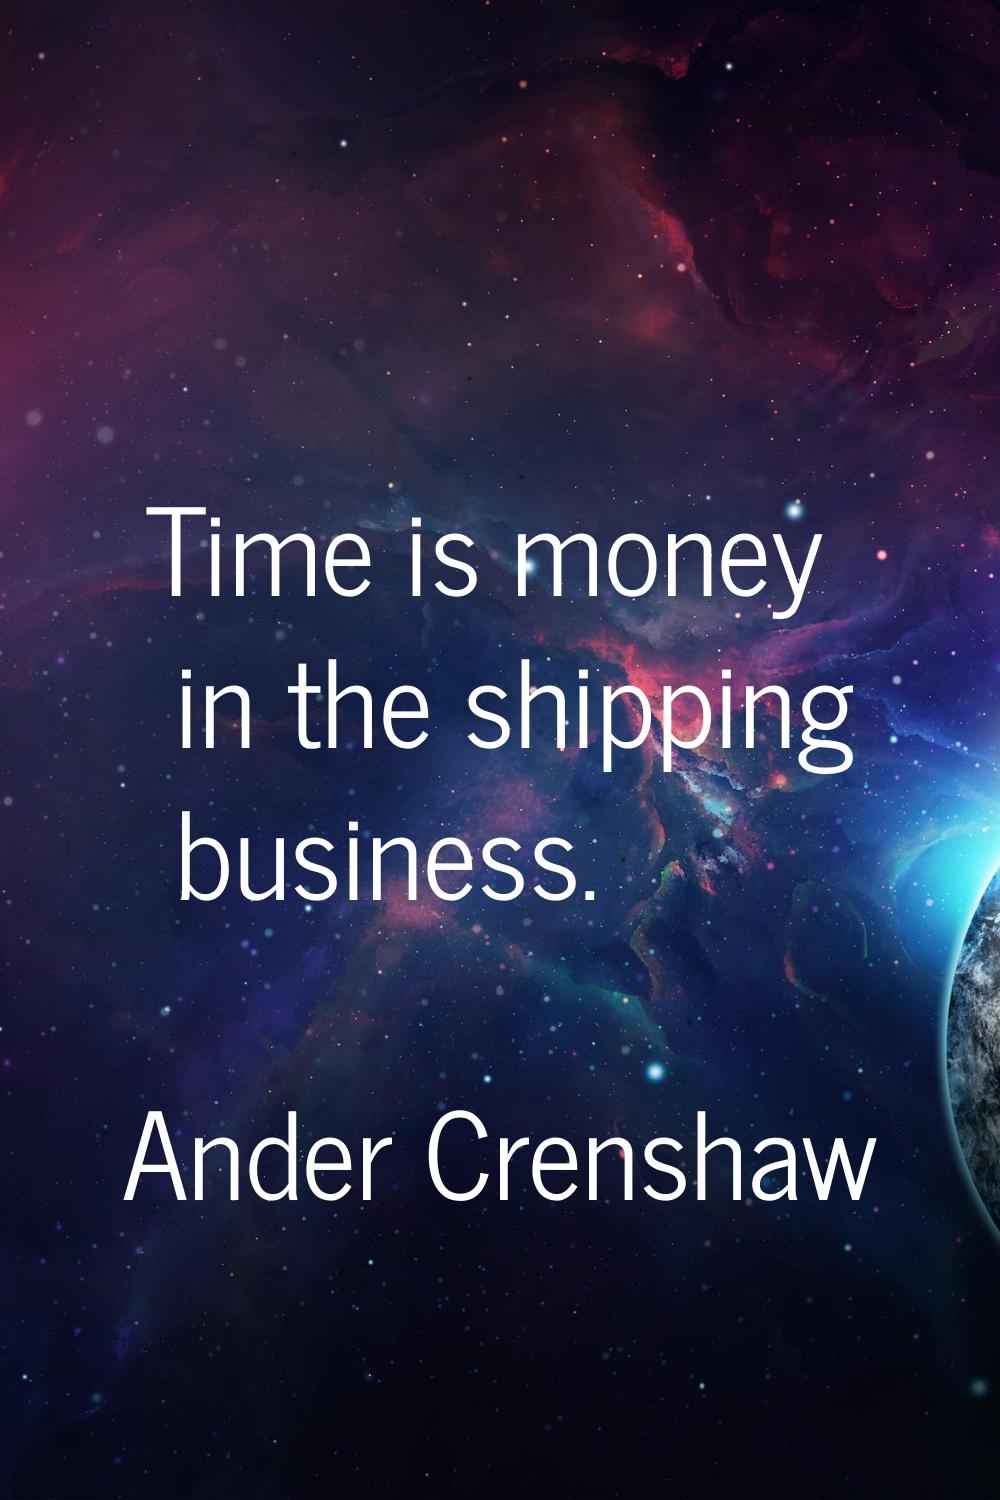 Time is money in the shipping business.